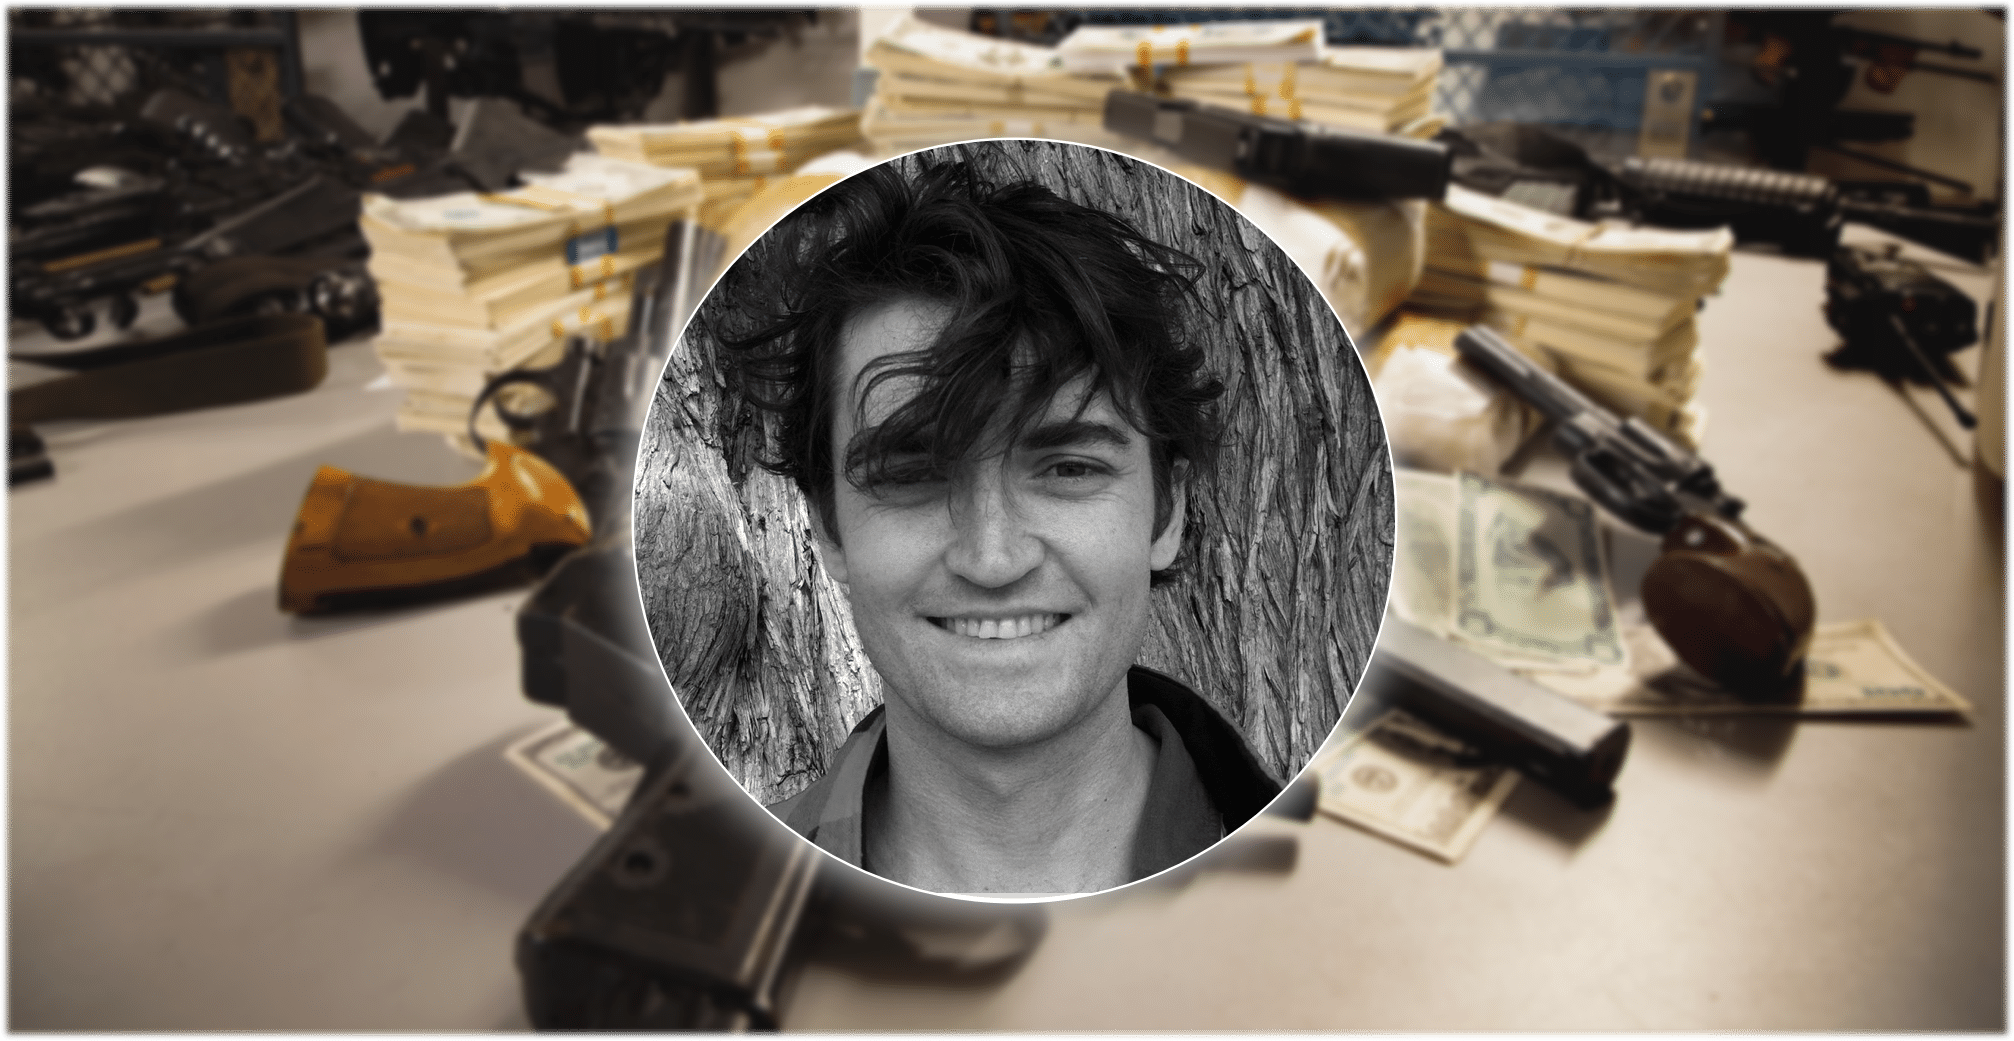 Who is Ross Ulbricht? A Journey into the Dark Net and Cryptocurrency